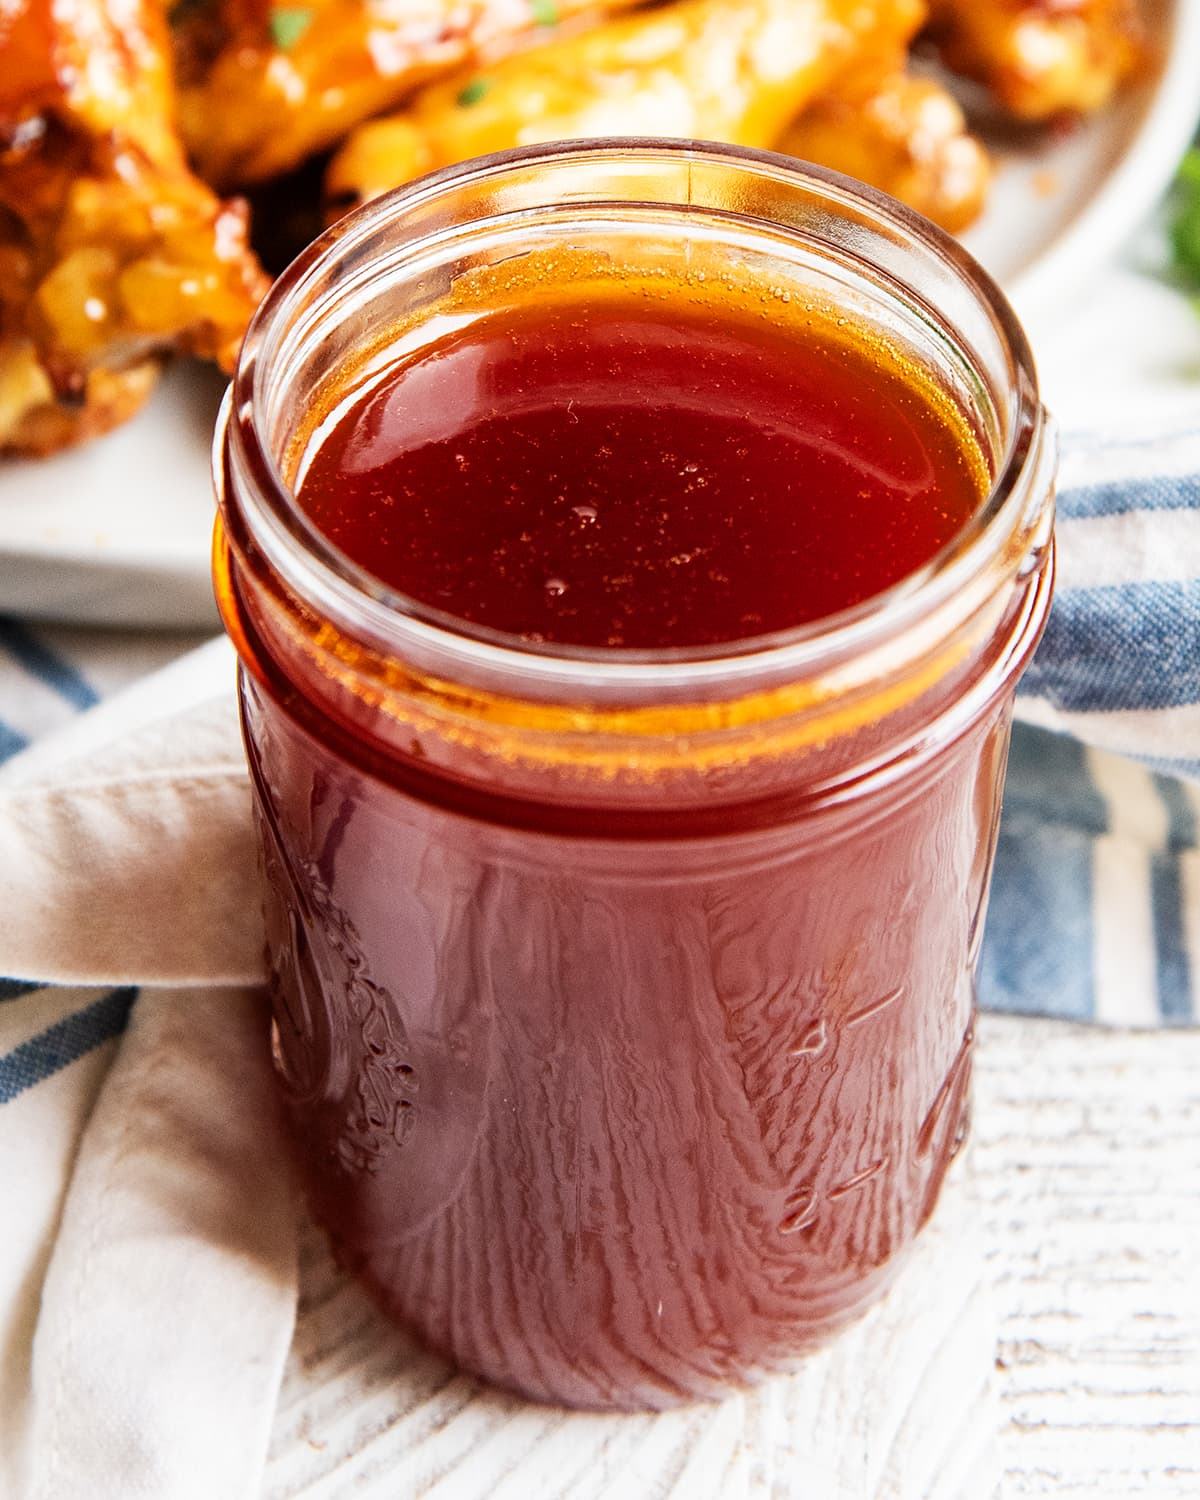 A glass jar full of homemade honey buffalo wing sauce, with a plate of wings behind it.